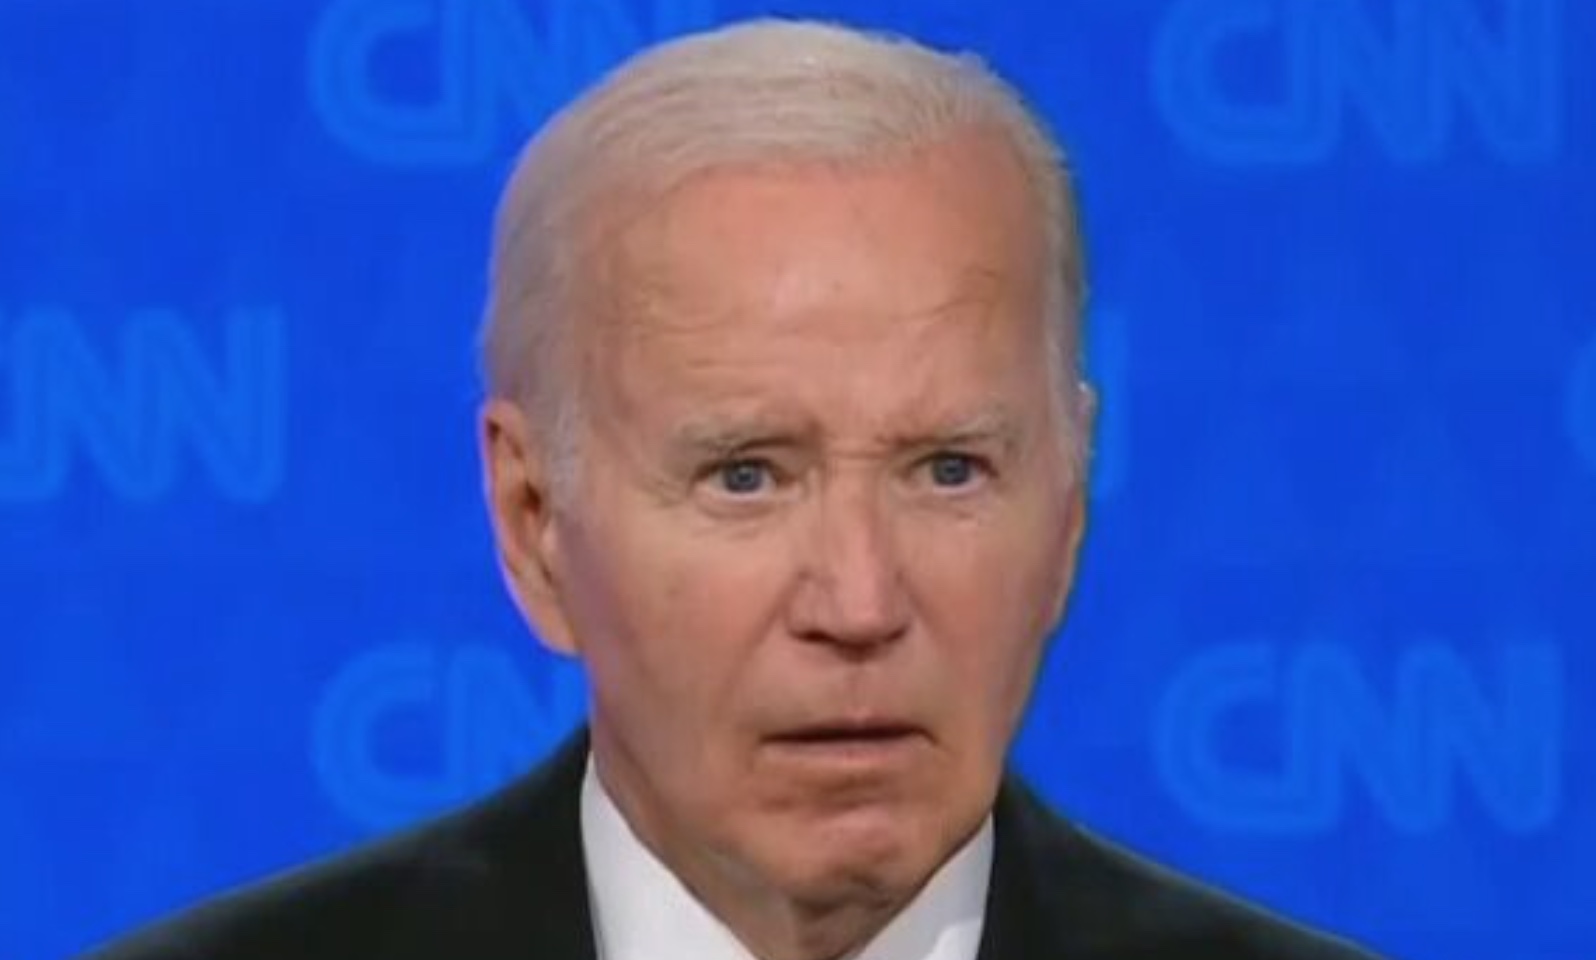 New York Times Editorial Board Calls for Biden to Drop Out in Shocking Op-Ed